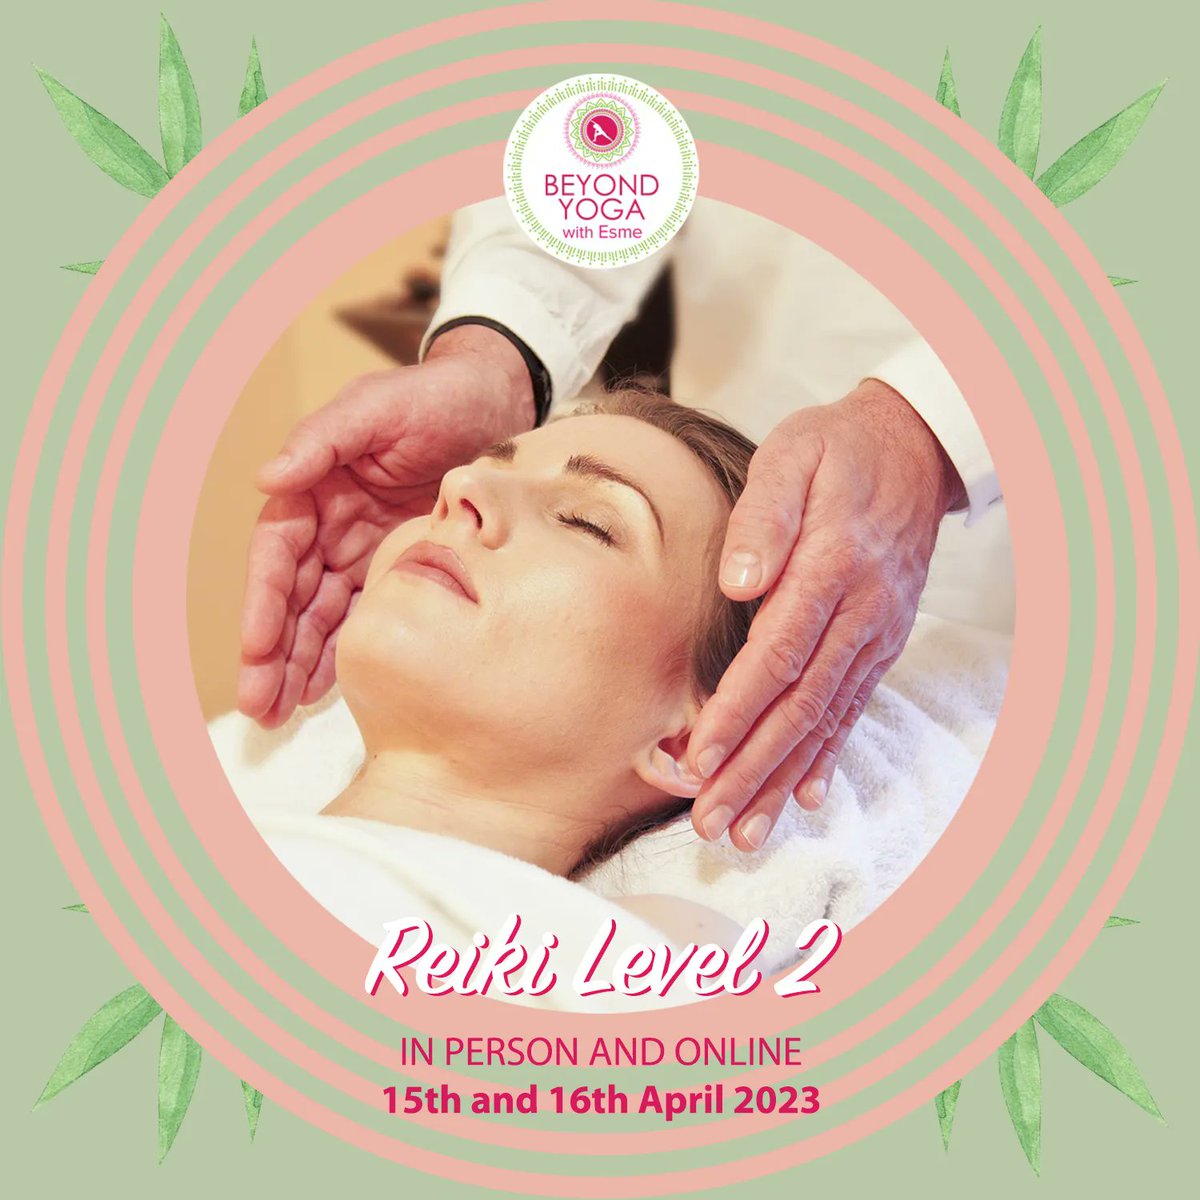 This year, Reiki Level 2 is going to be streamed at the same time as the in-person event. 💻 🧘🏼‍♀️ 

Which will you be enrolling in? ✨ 

#Reiki #Healing #Energy #ReikiPractitioner #AlternativeTherapies #Wellness #Selfcare #TogetherWeCan #HoldYourselfUp #HoldUpOthers #SupportOthers